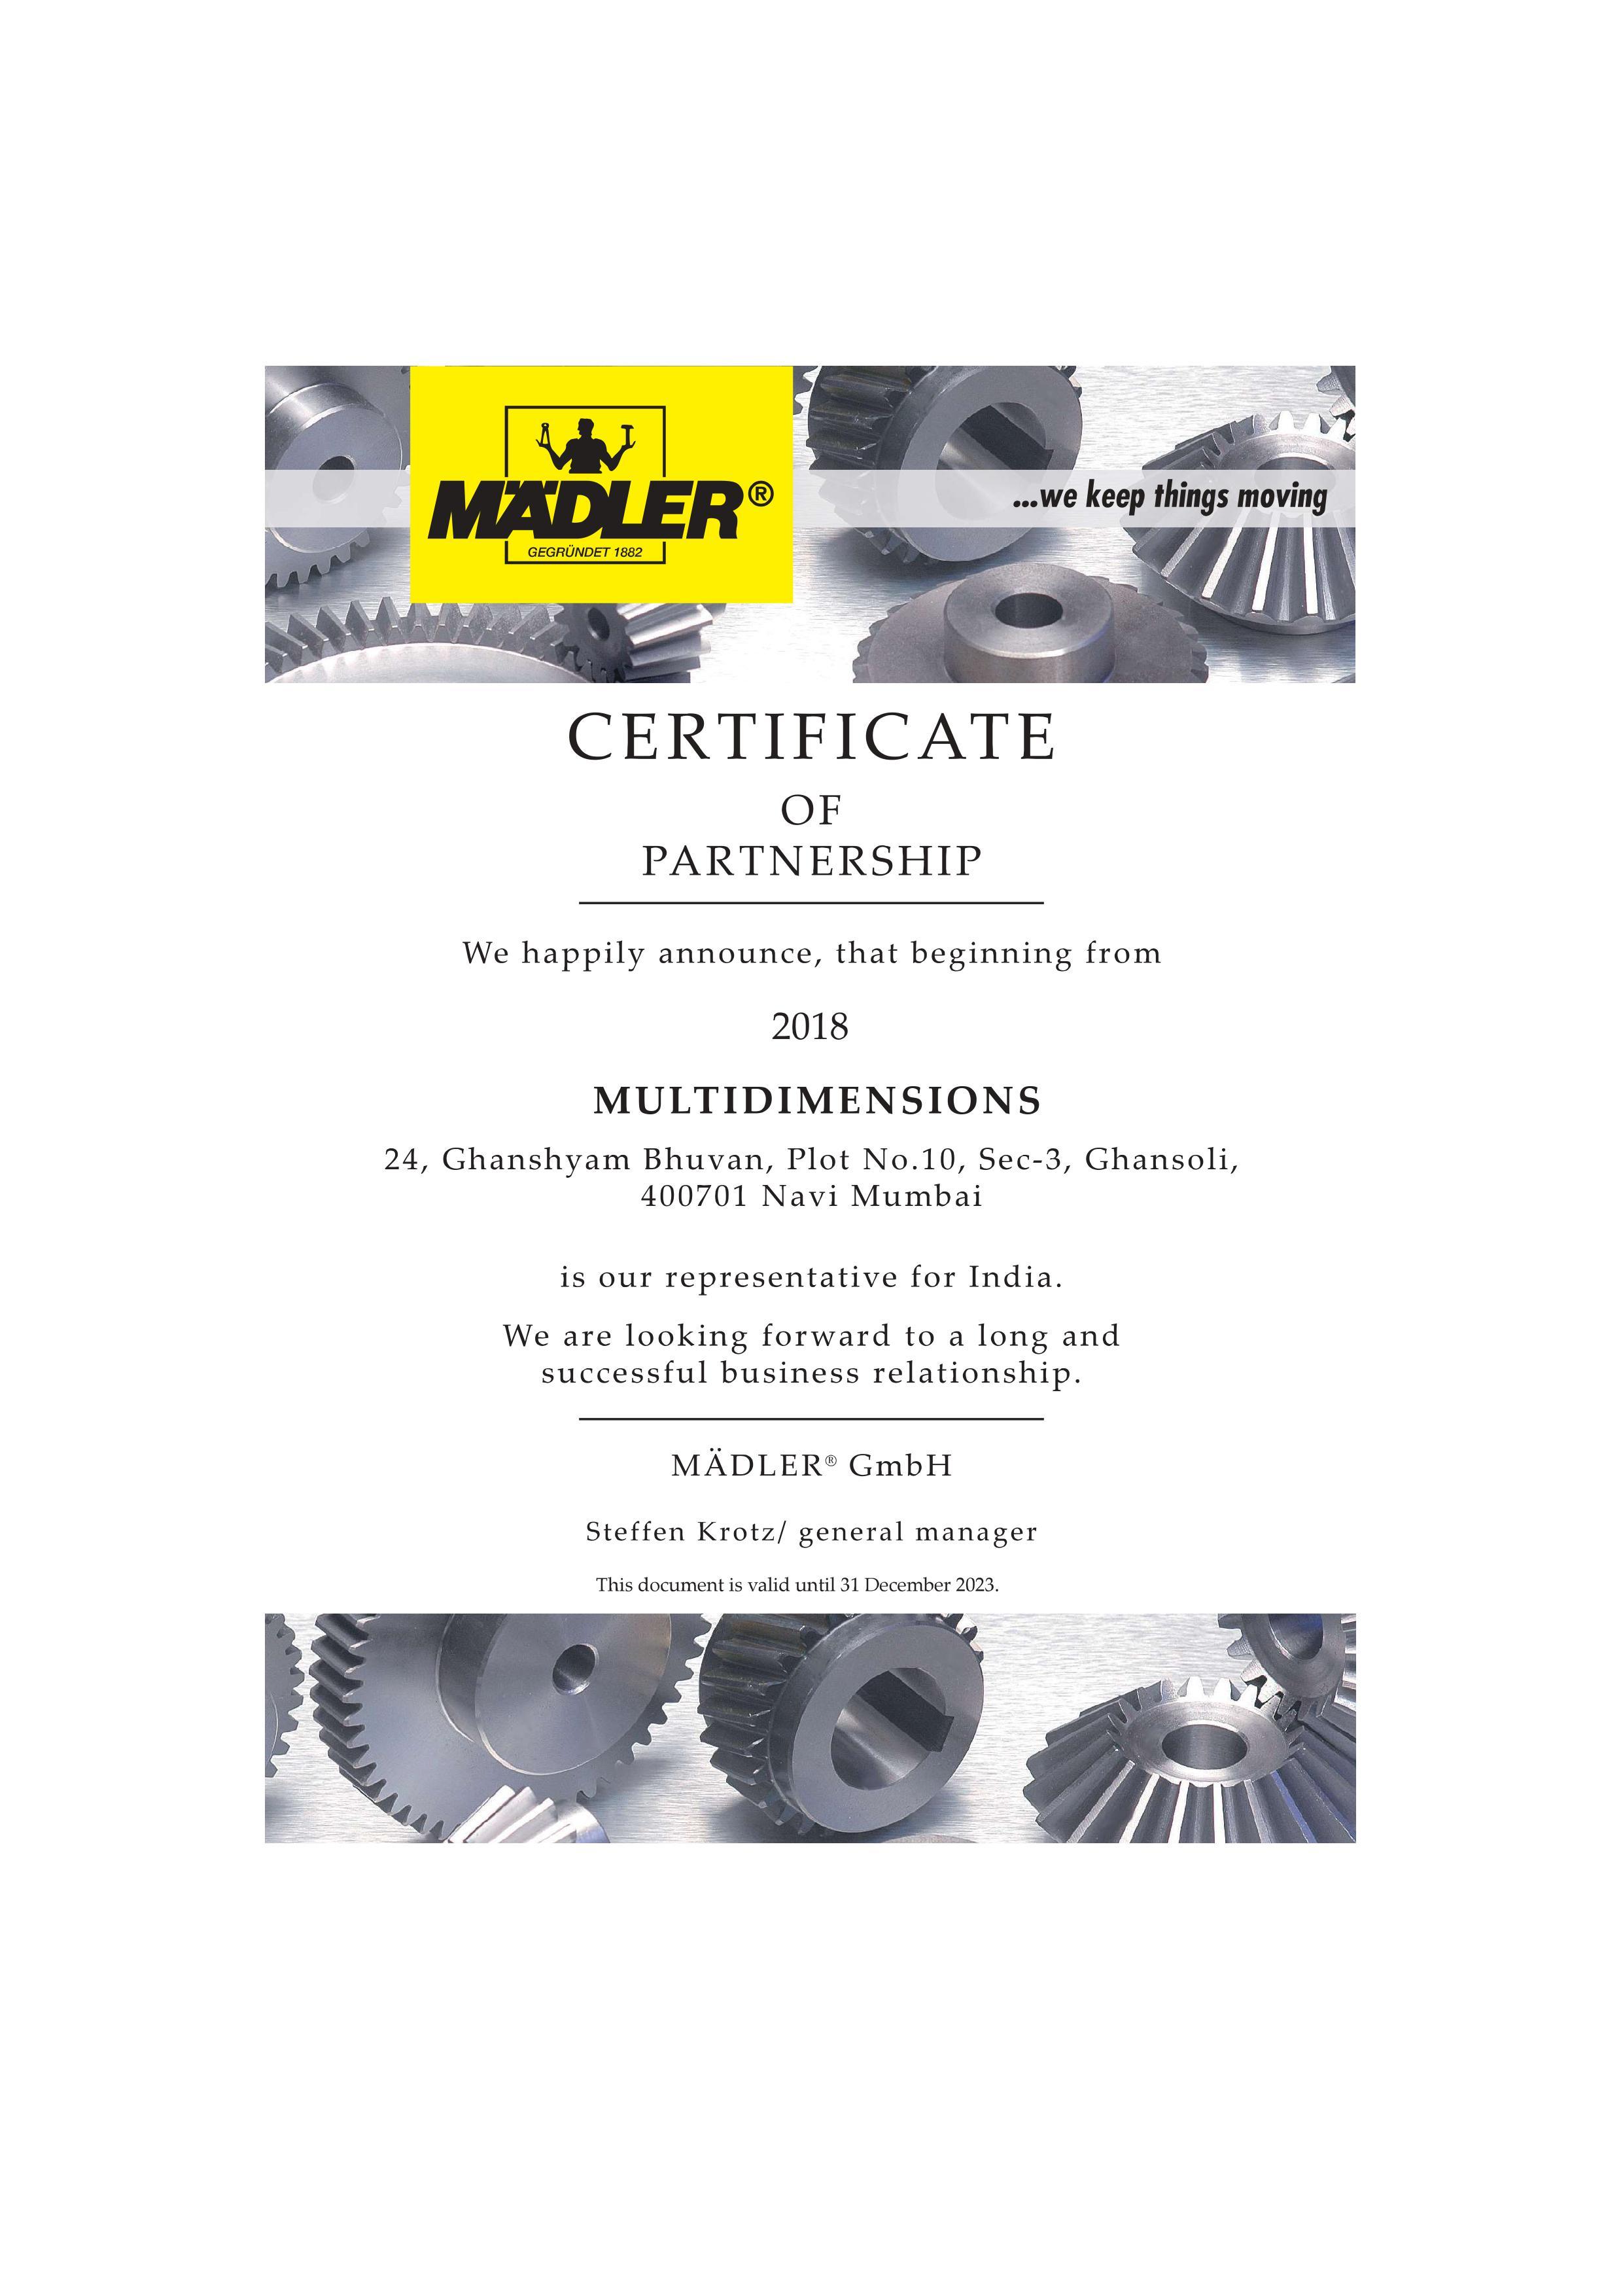 Authorized Certificate - Maedler(GmbH)